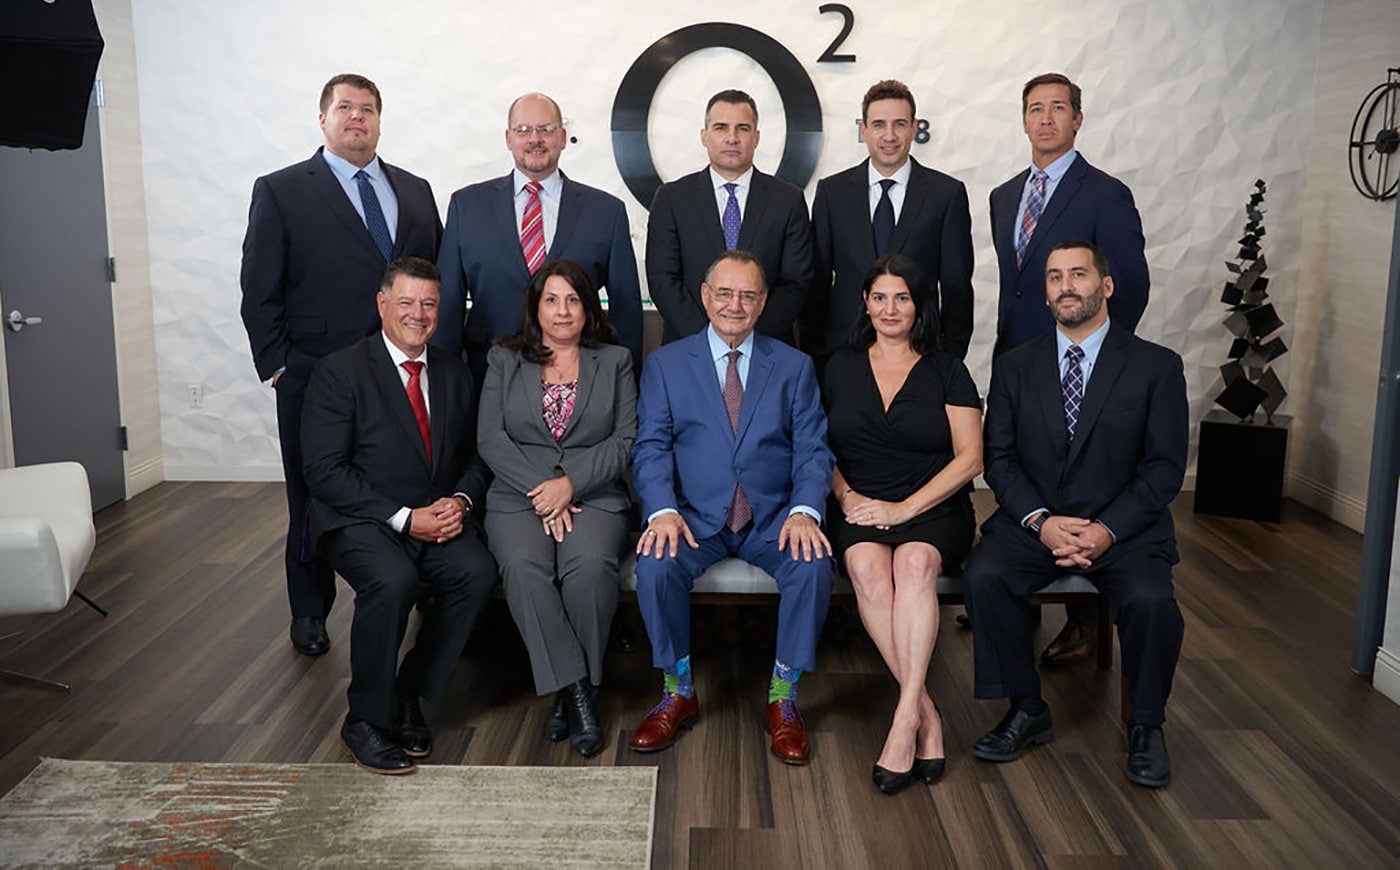 The Odierno Law Firm, P.C. Staff